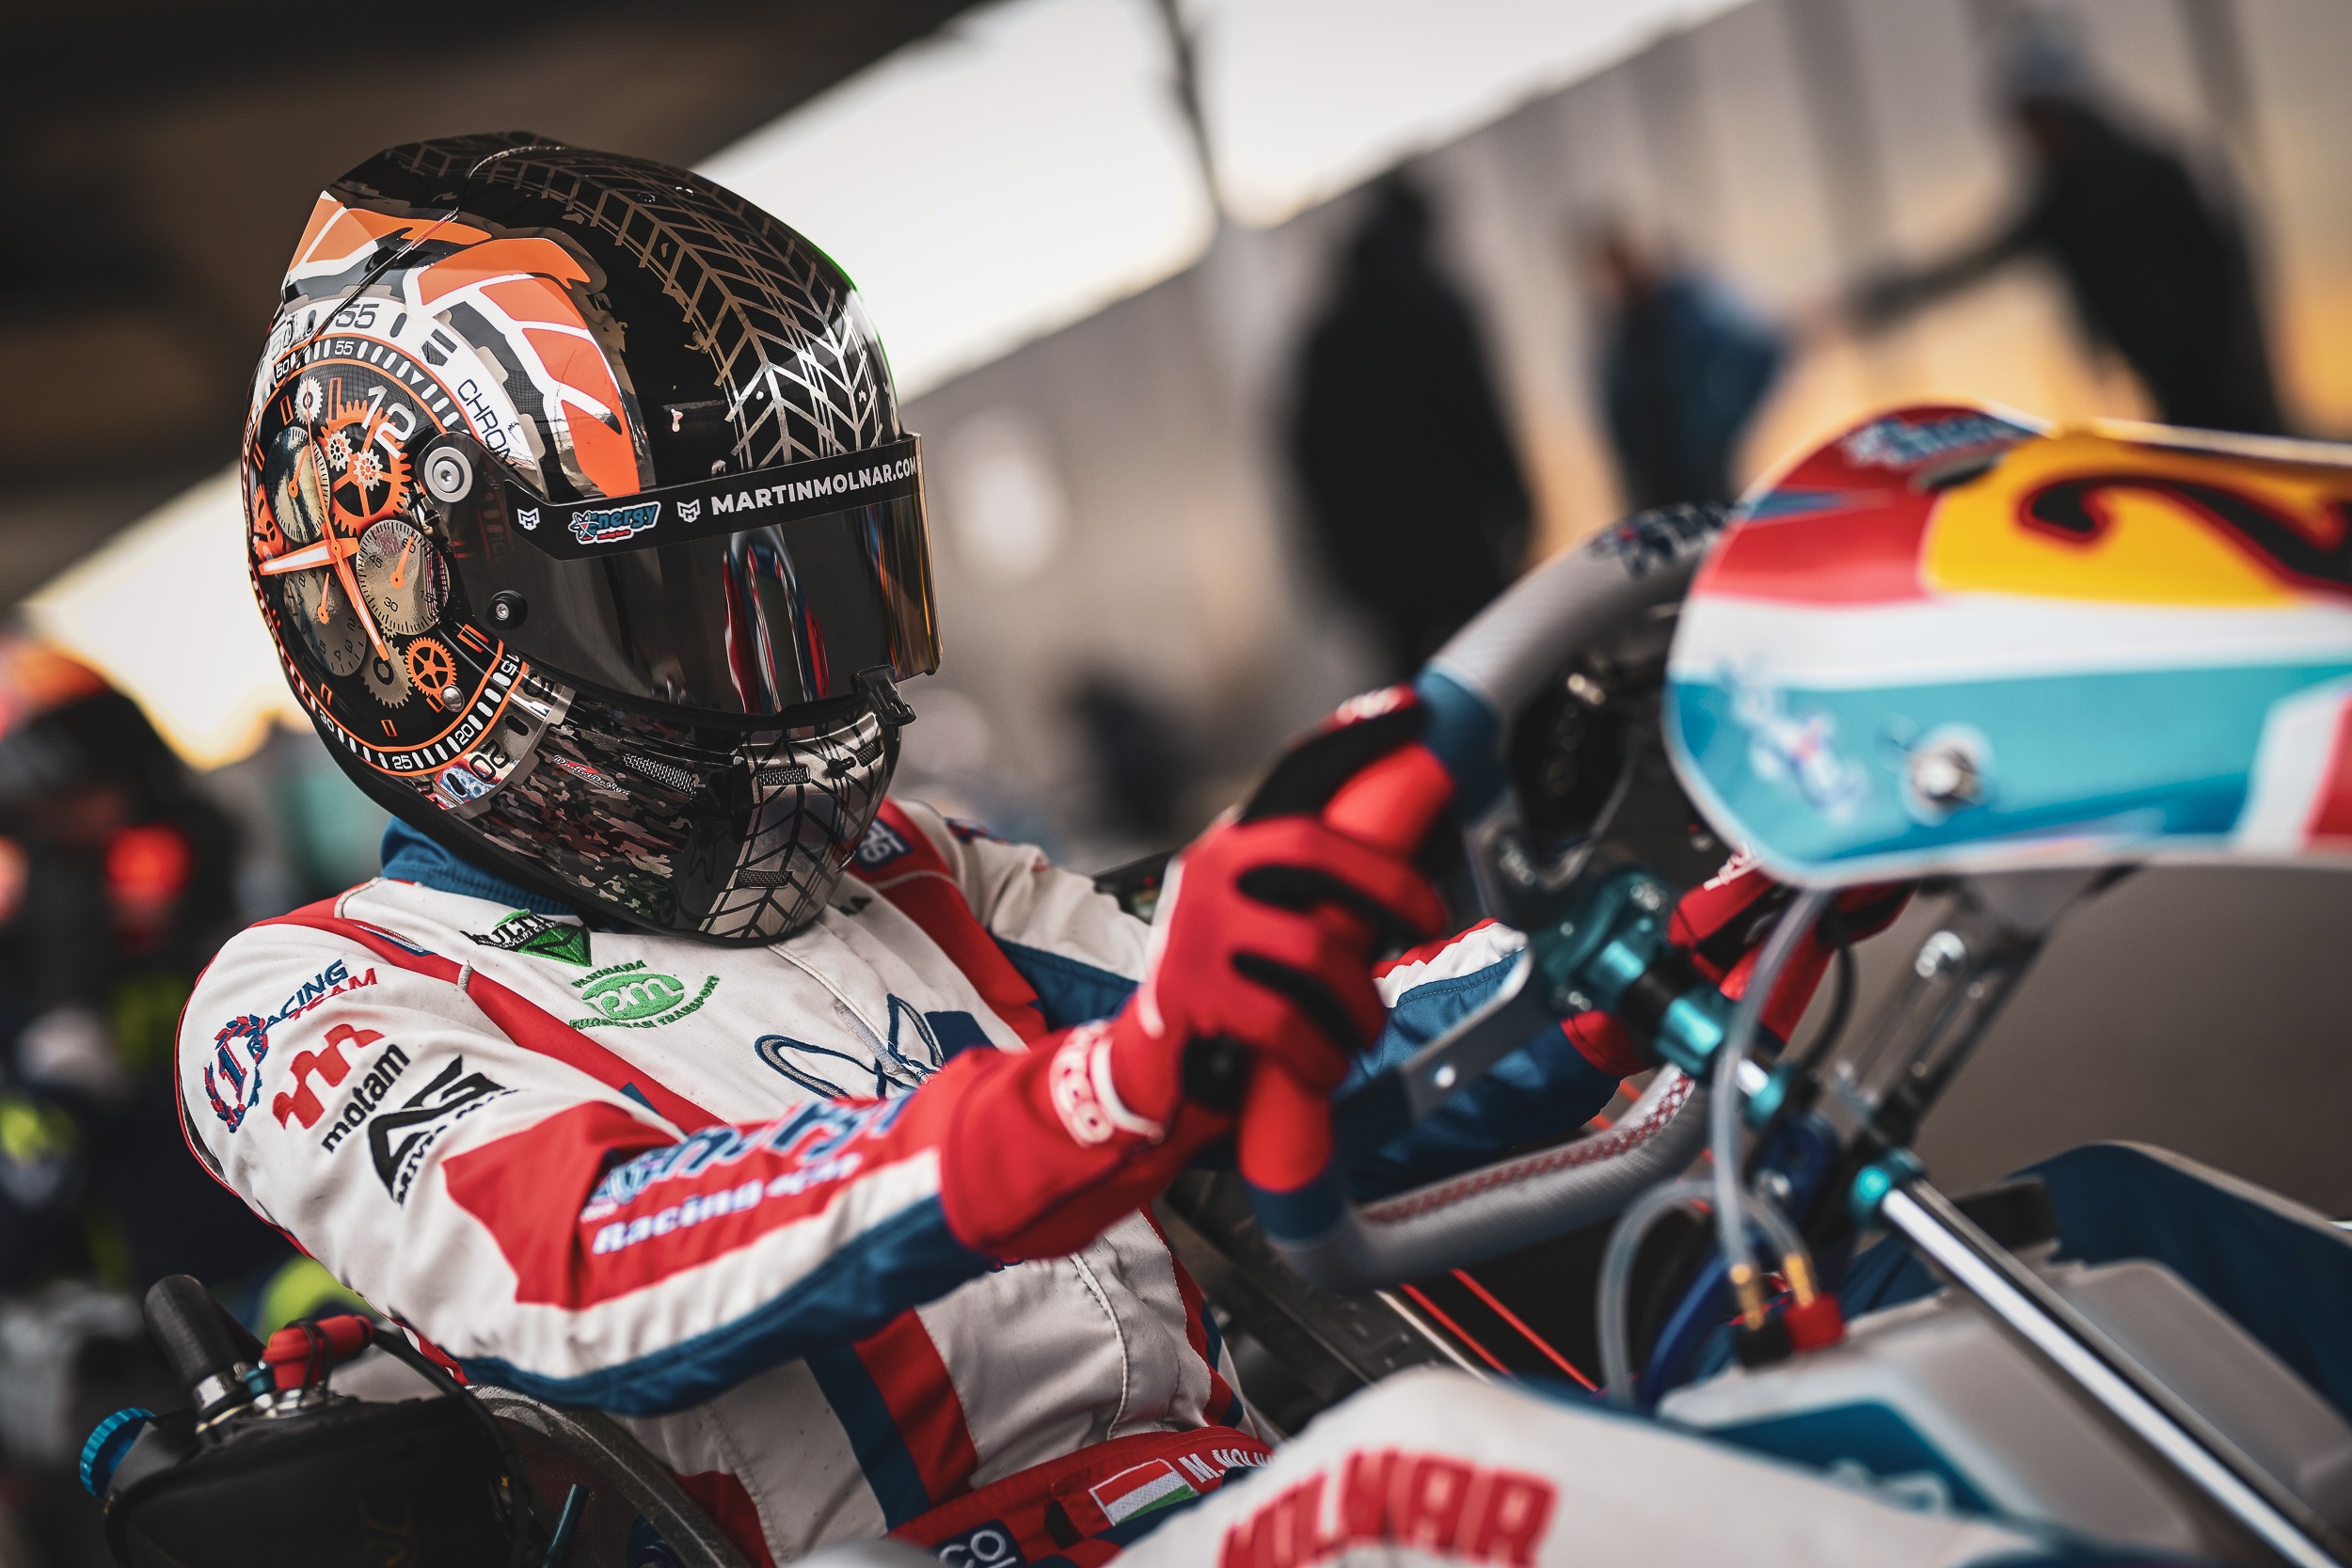 Increasing his lead at the top of the world rankings, Martin Molnár prepares for the start of the WSK Super Master Series